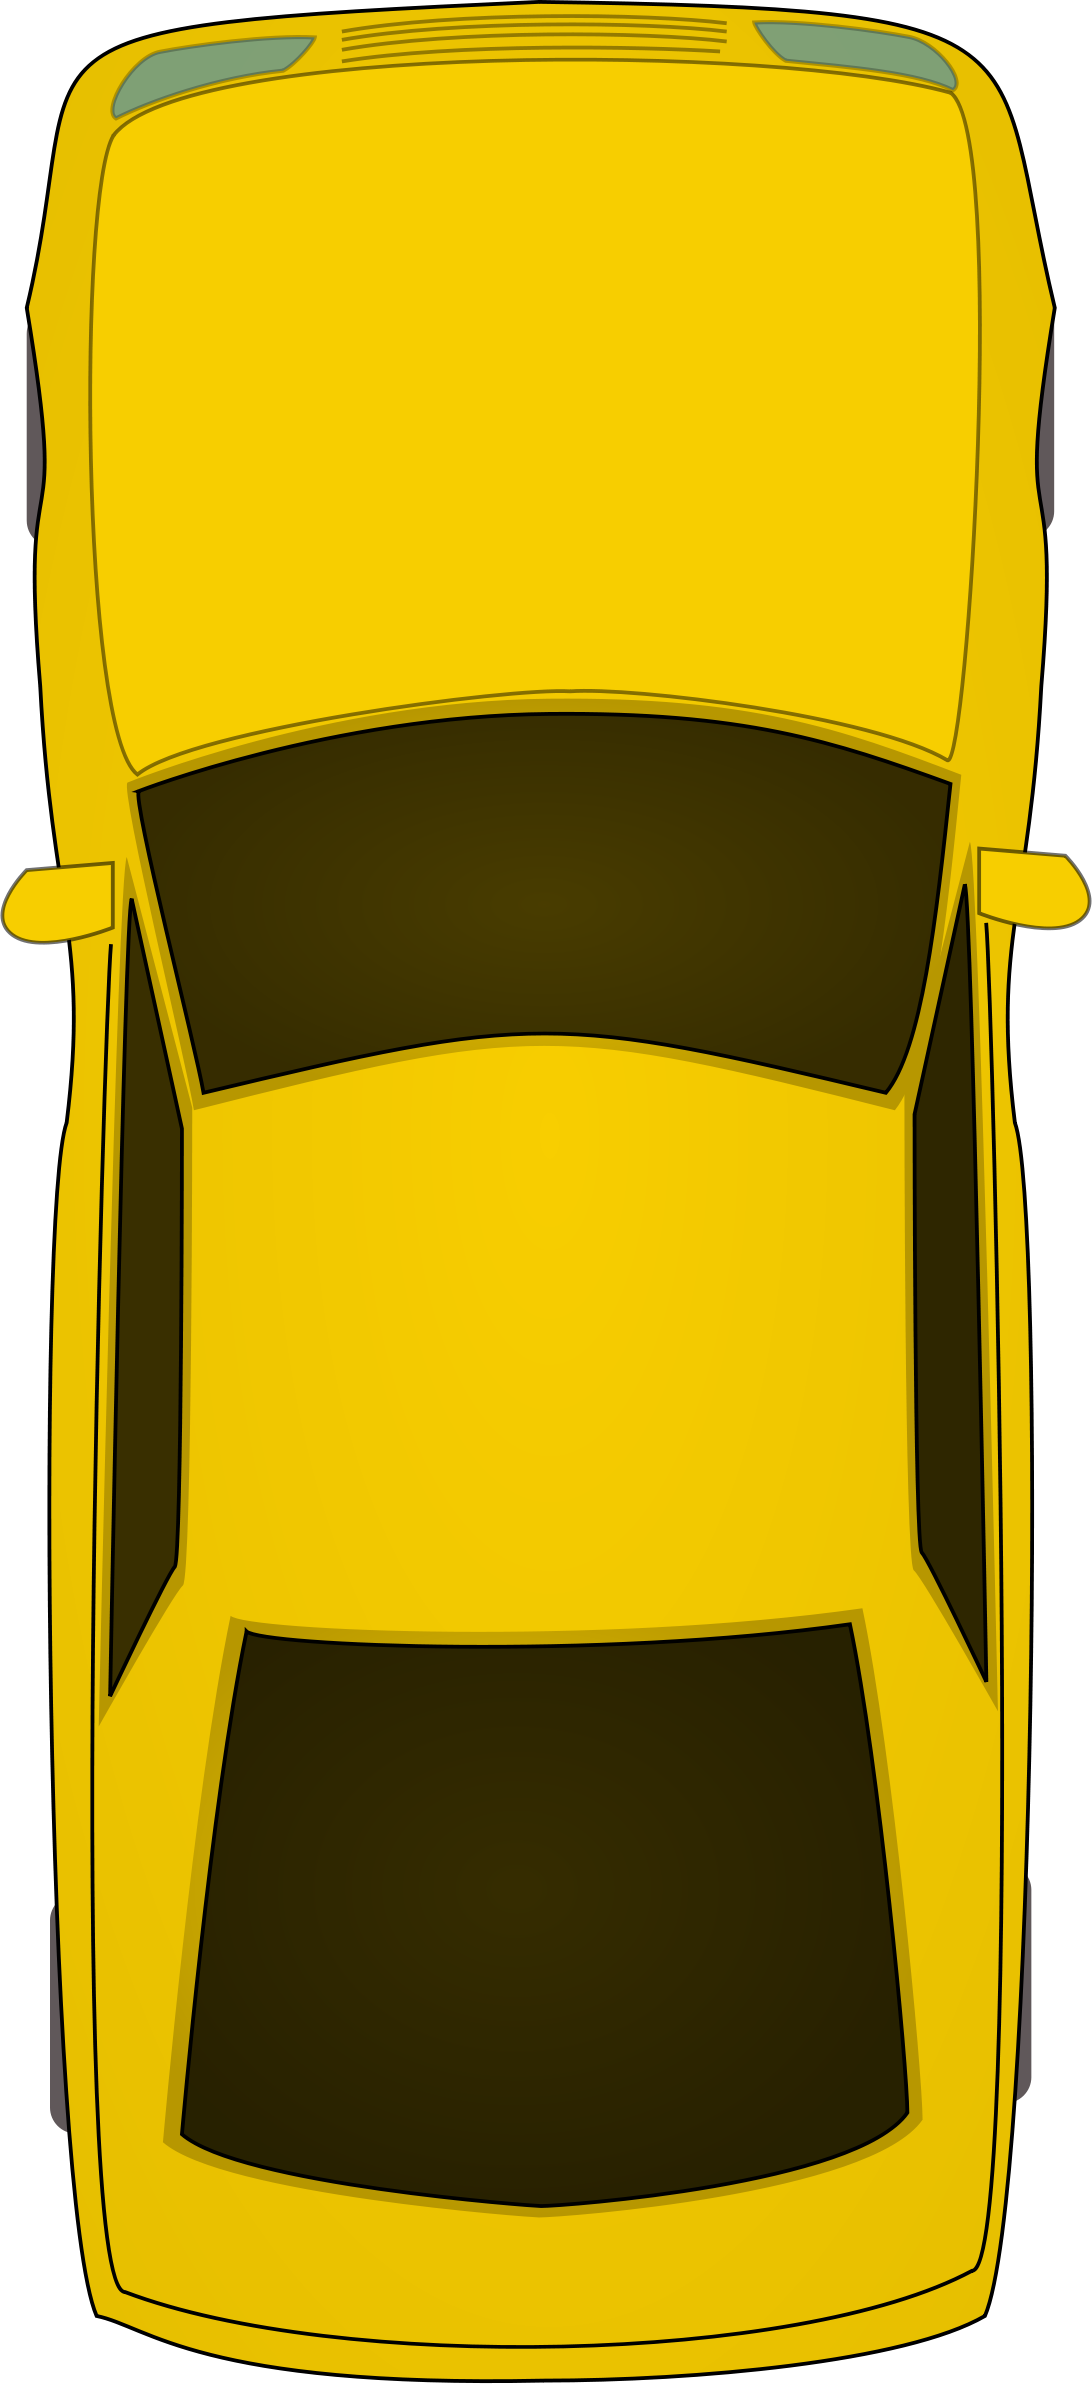 Hatchback Car Top View Png Clipart - Car Top View, Transparent background PNG HD thumbnail